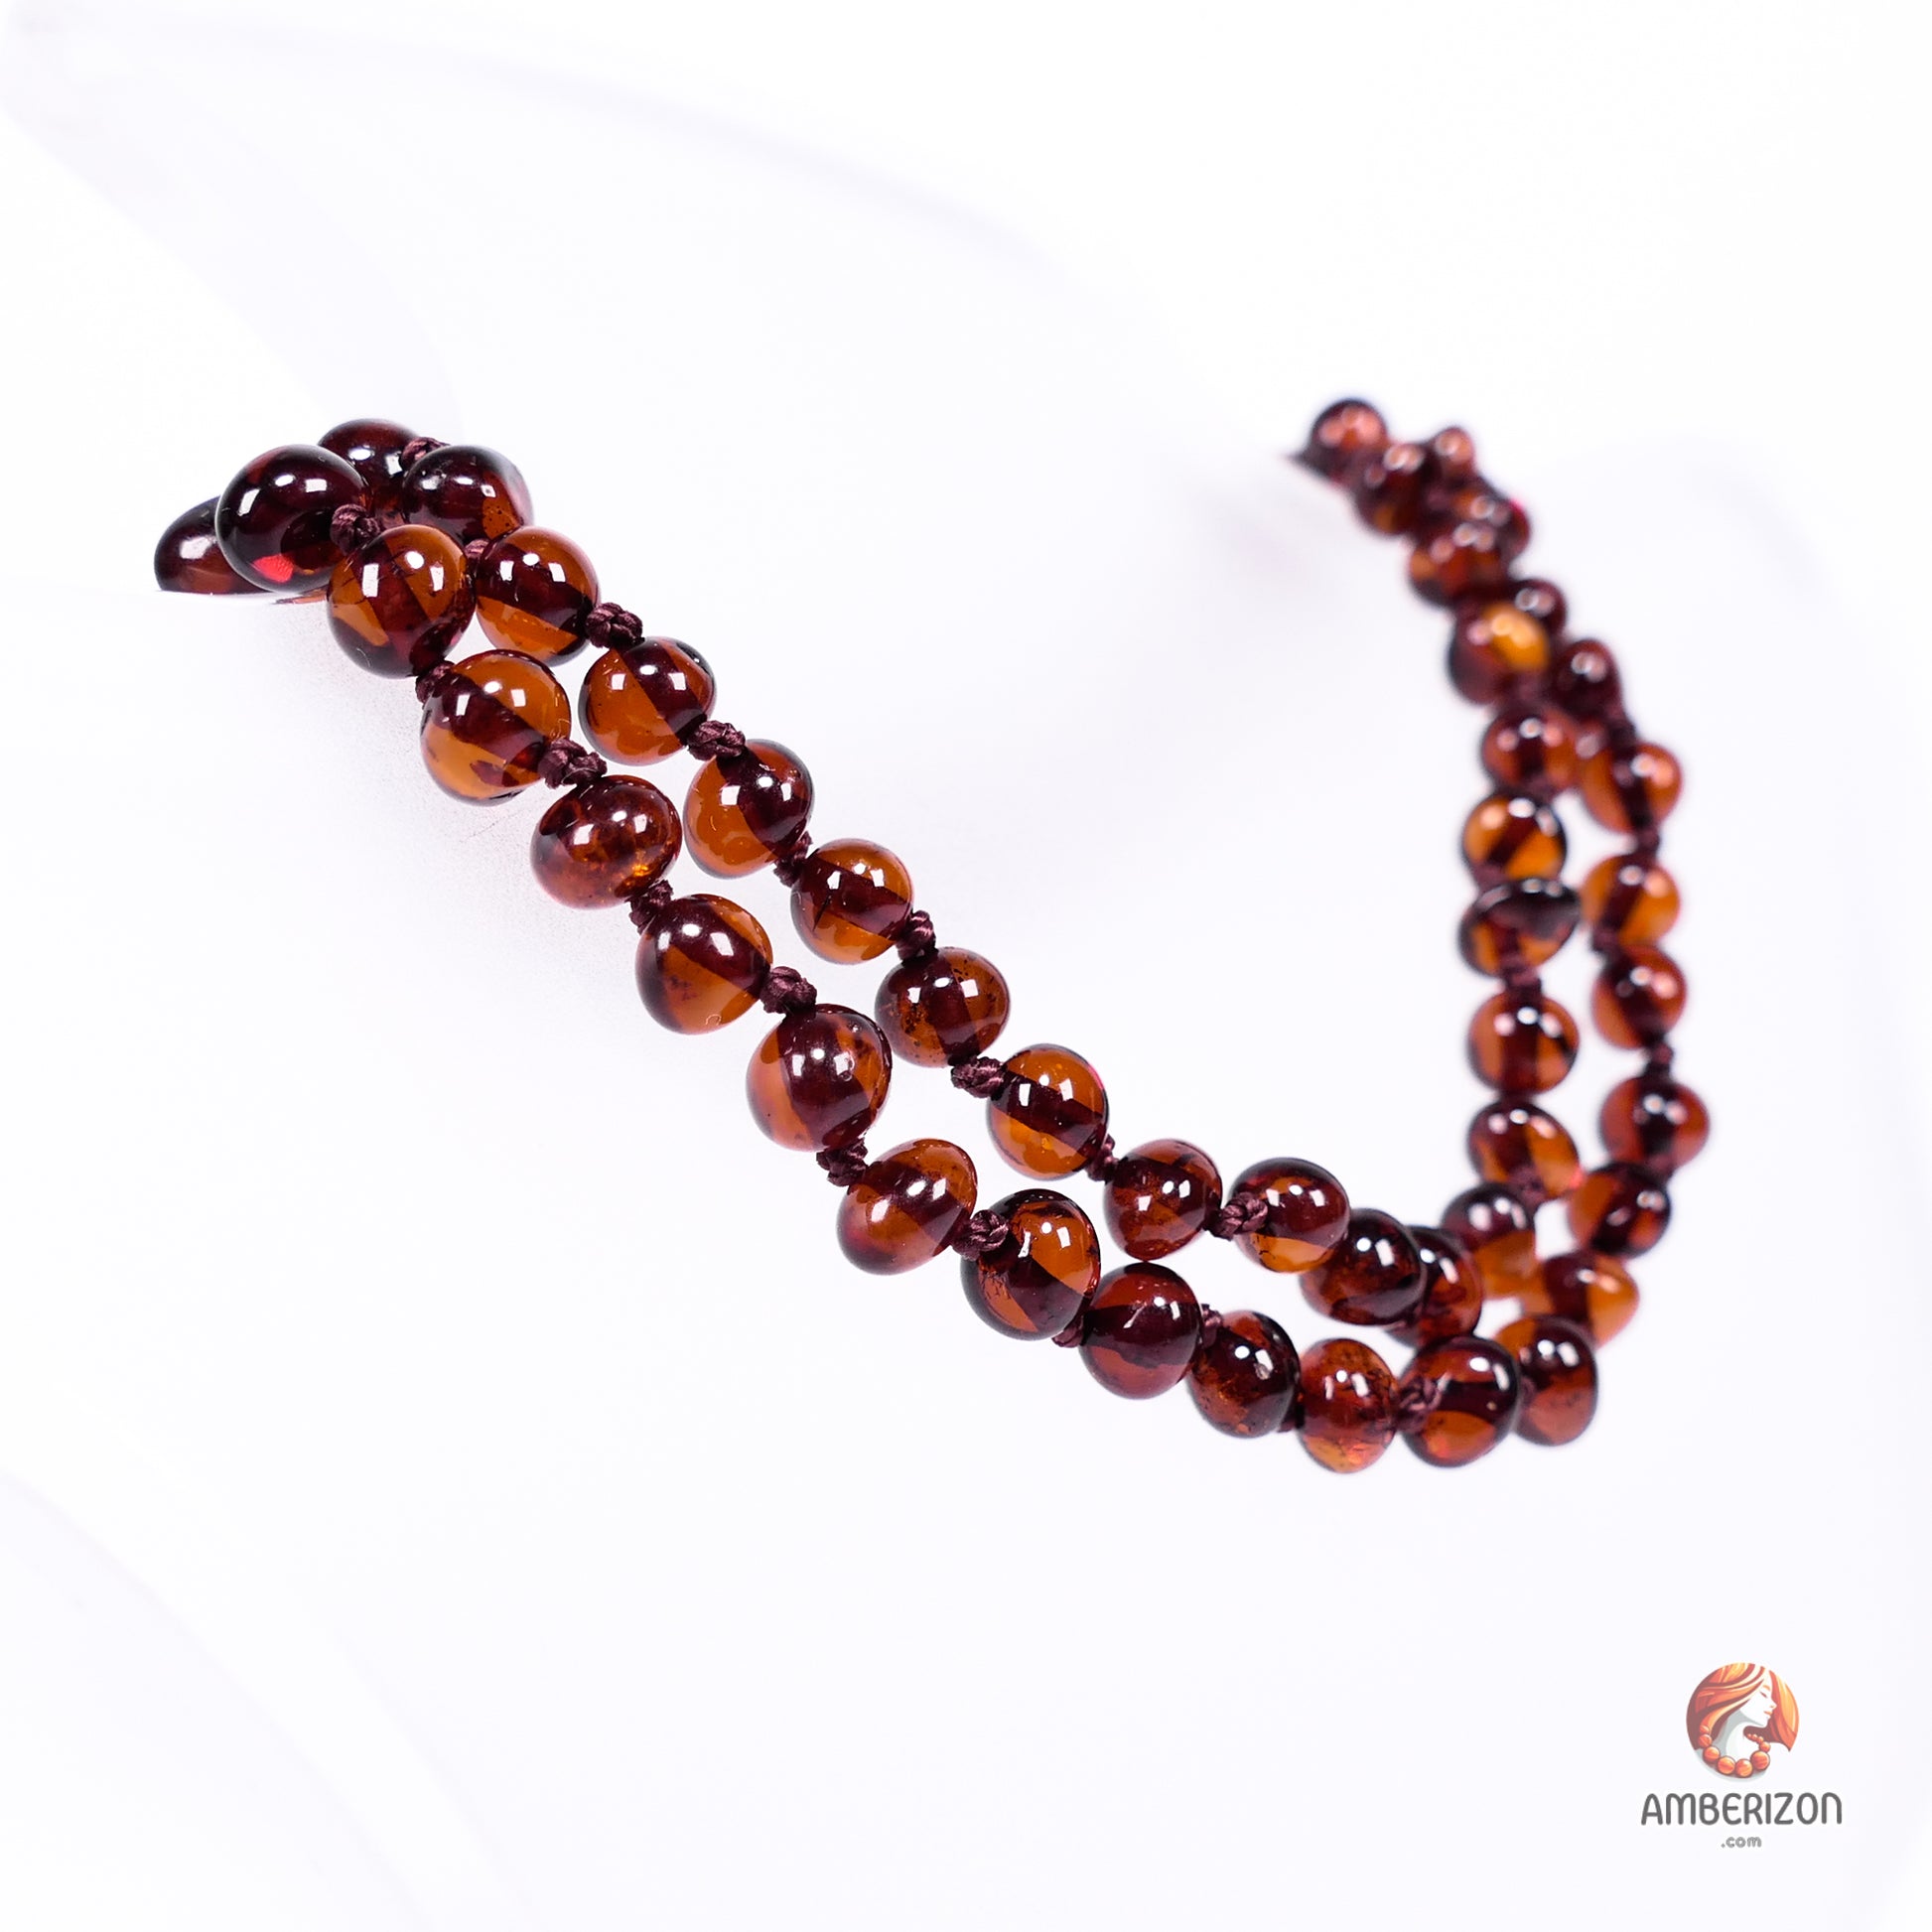 Unisex Baltic Amber Necklace - Polished Cherry Baroque Beads